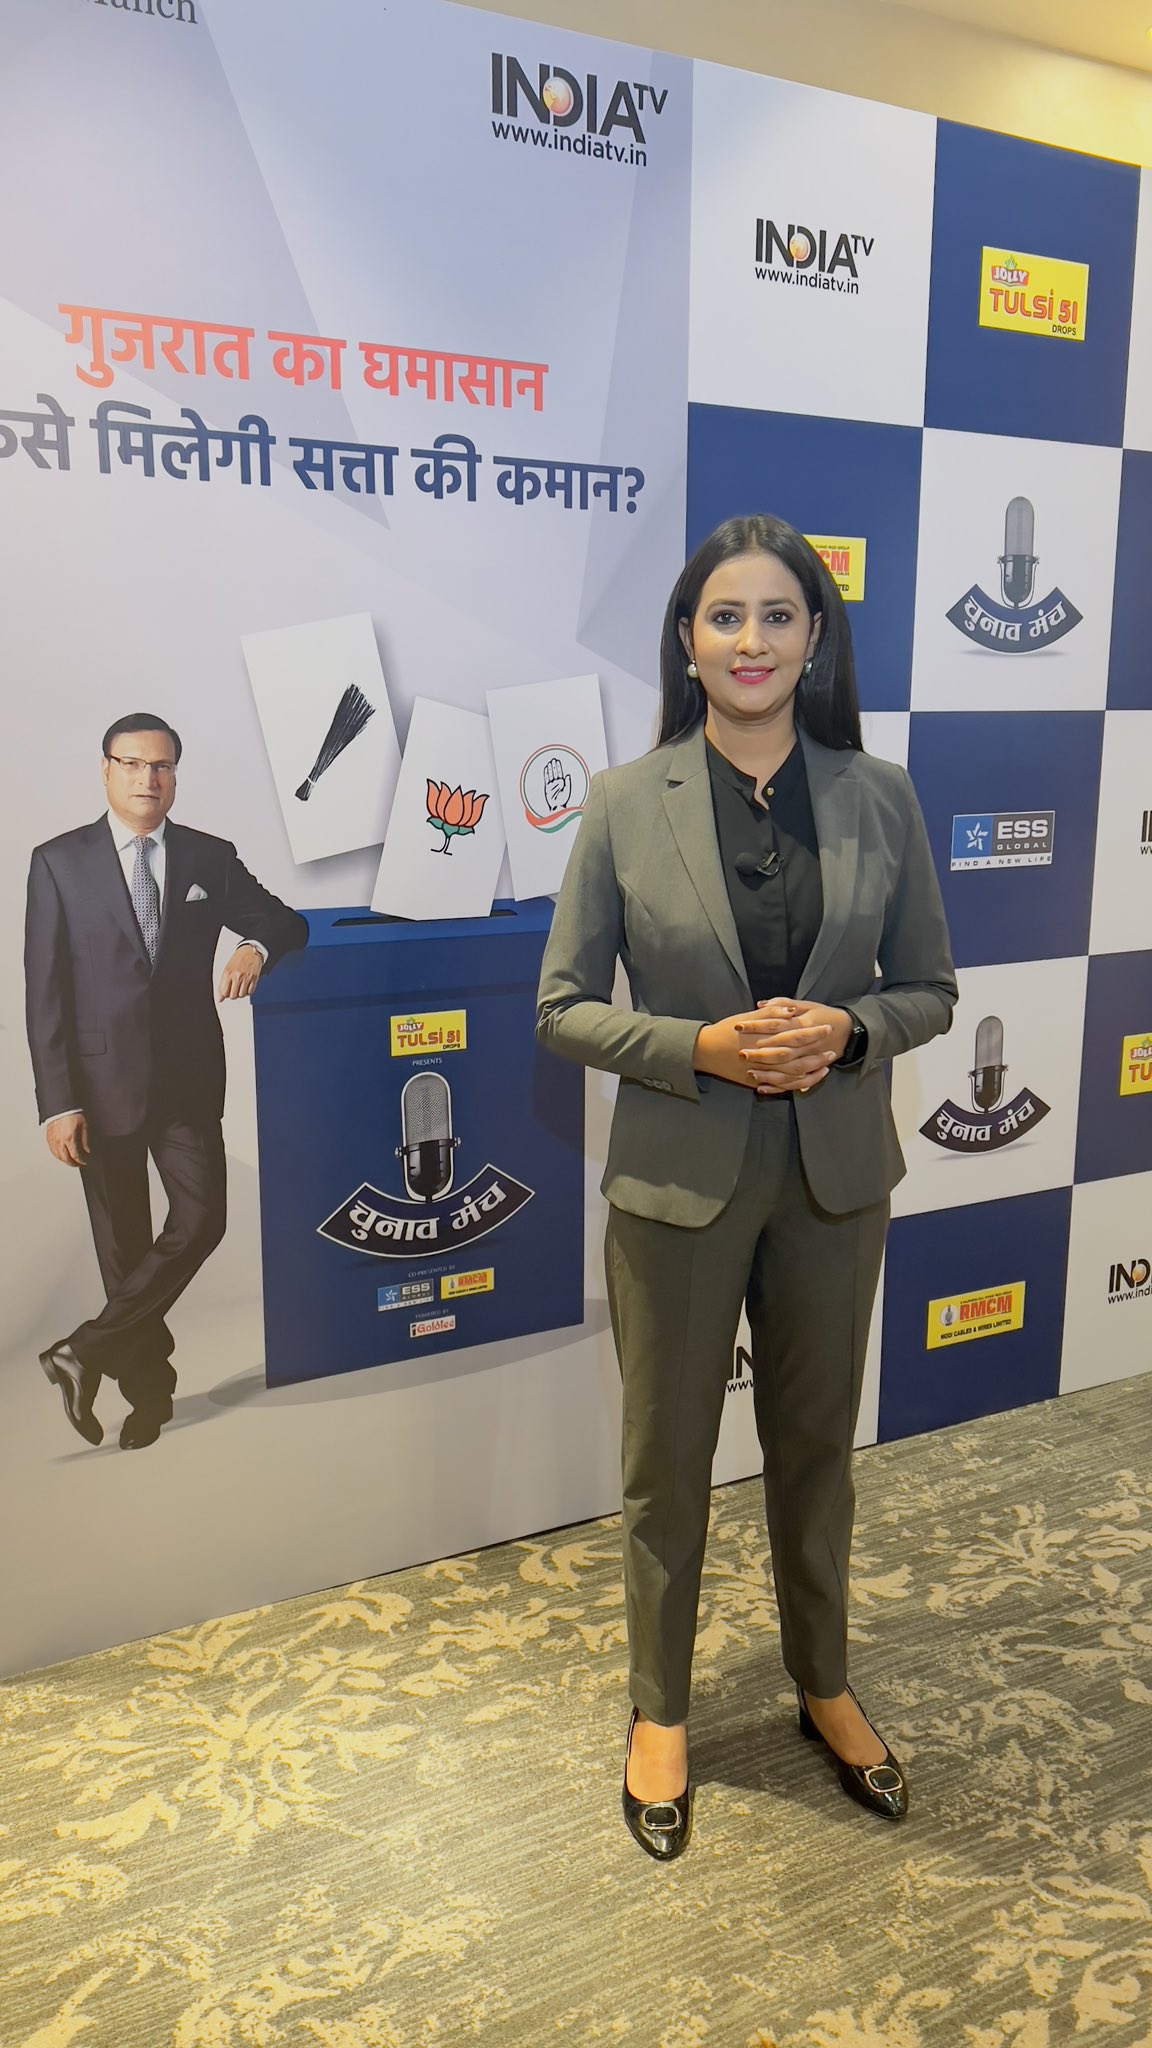 Prachi Parashar reporting at an event for India TV